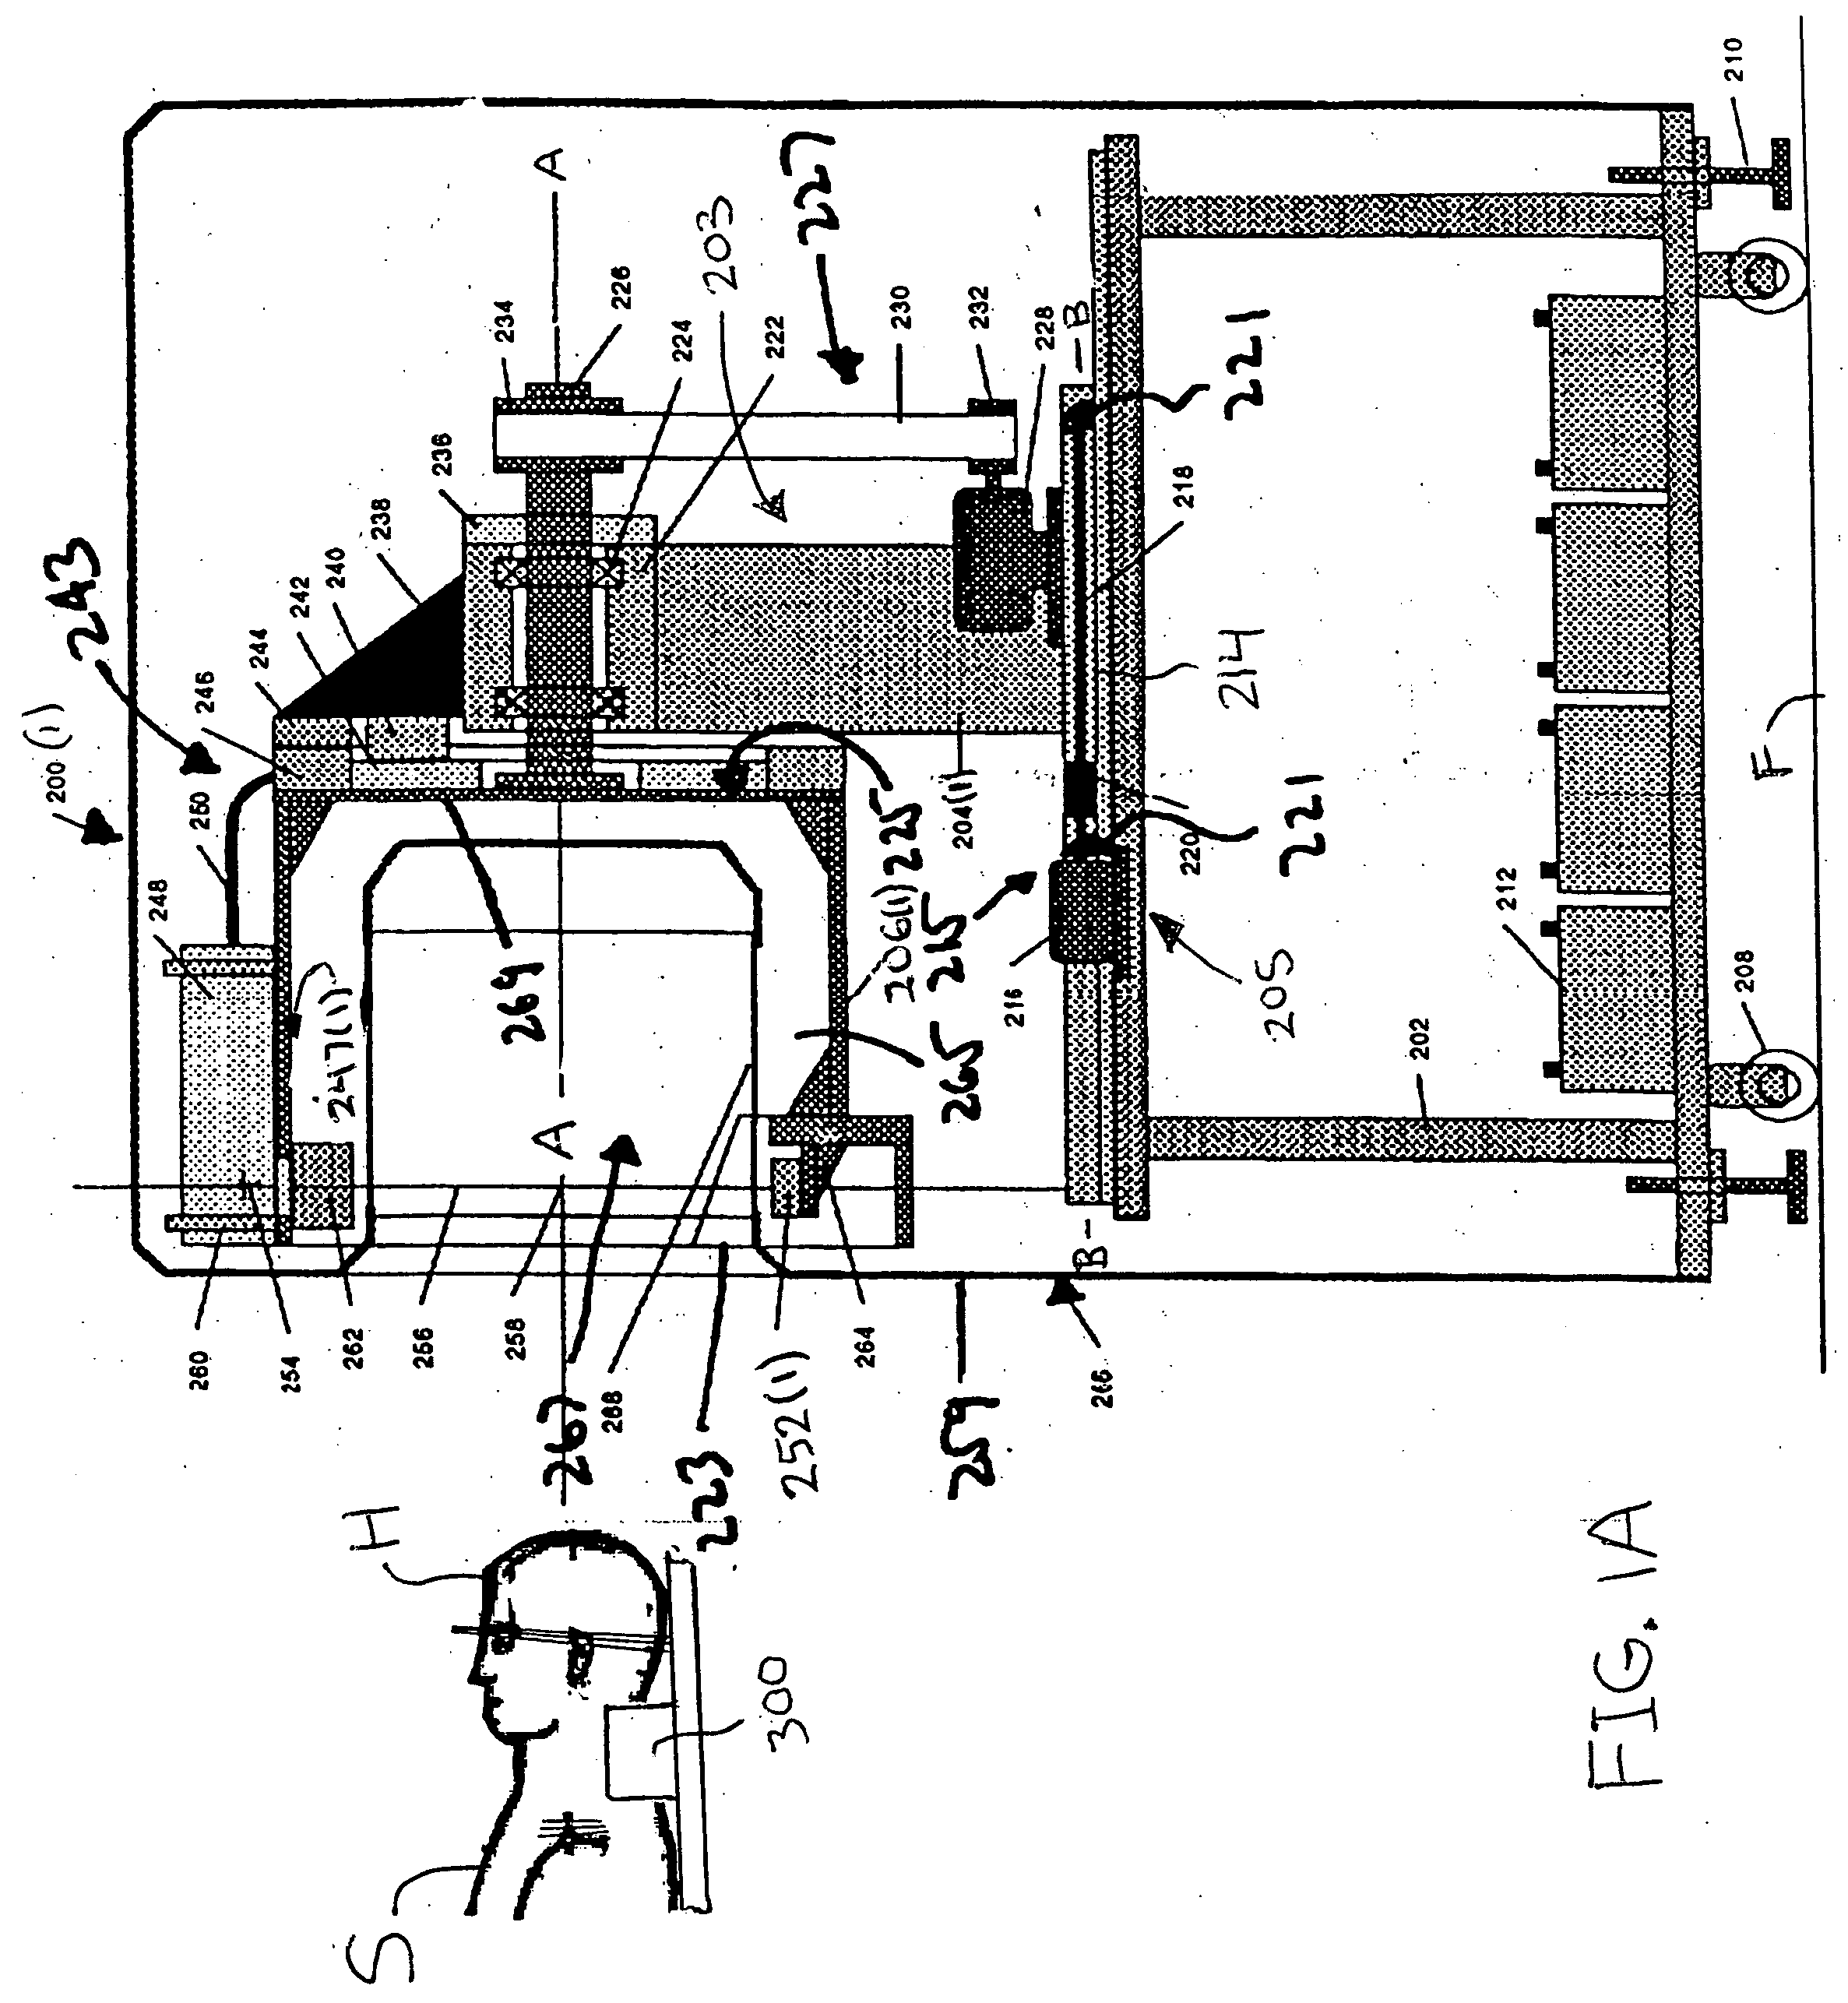 Portable computed tomography scanner and methods thereof